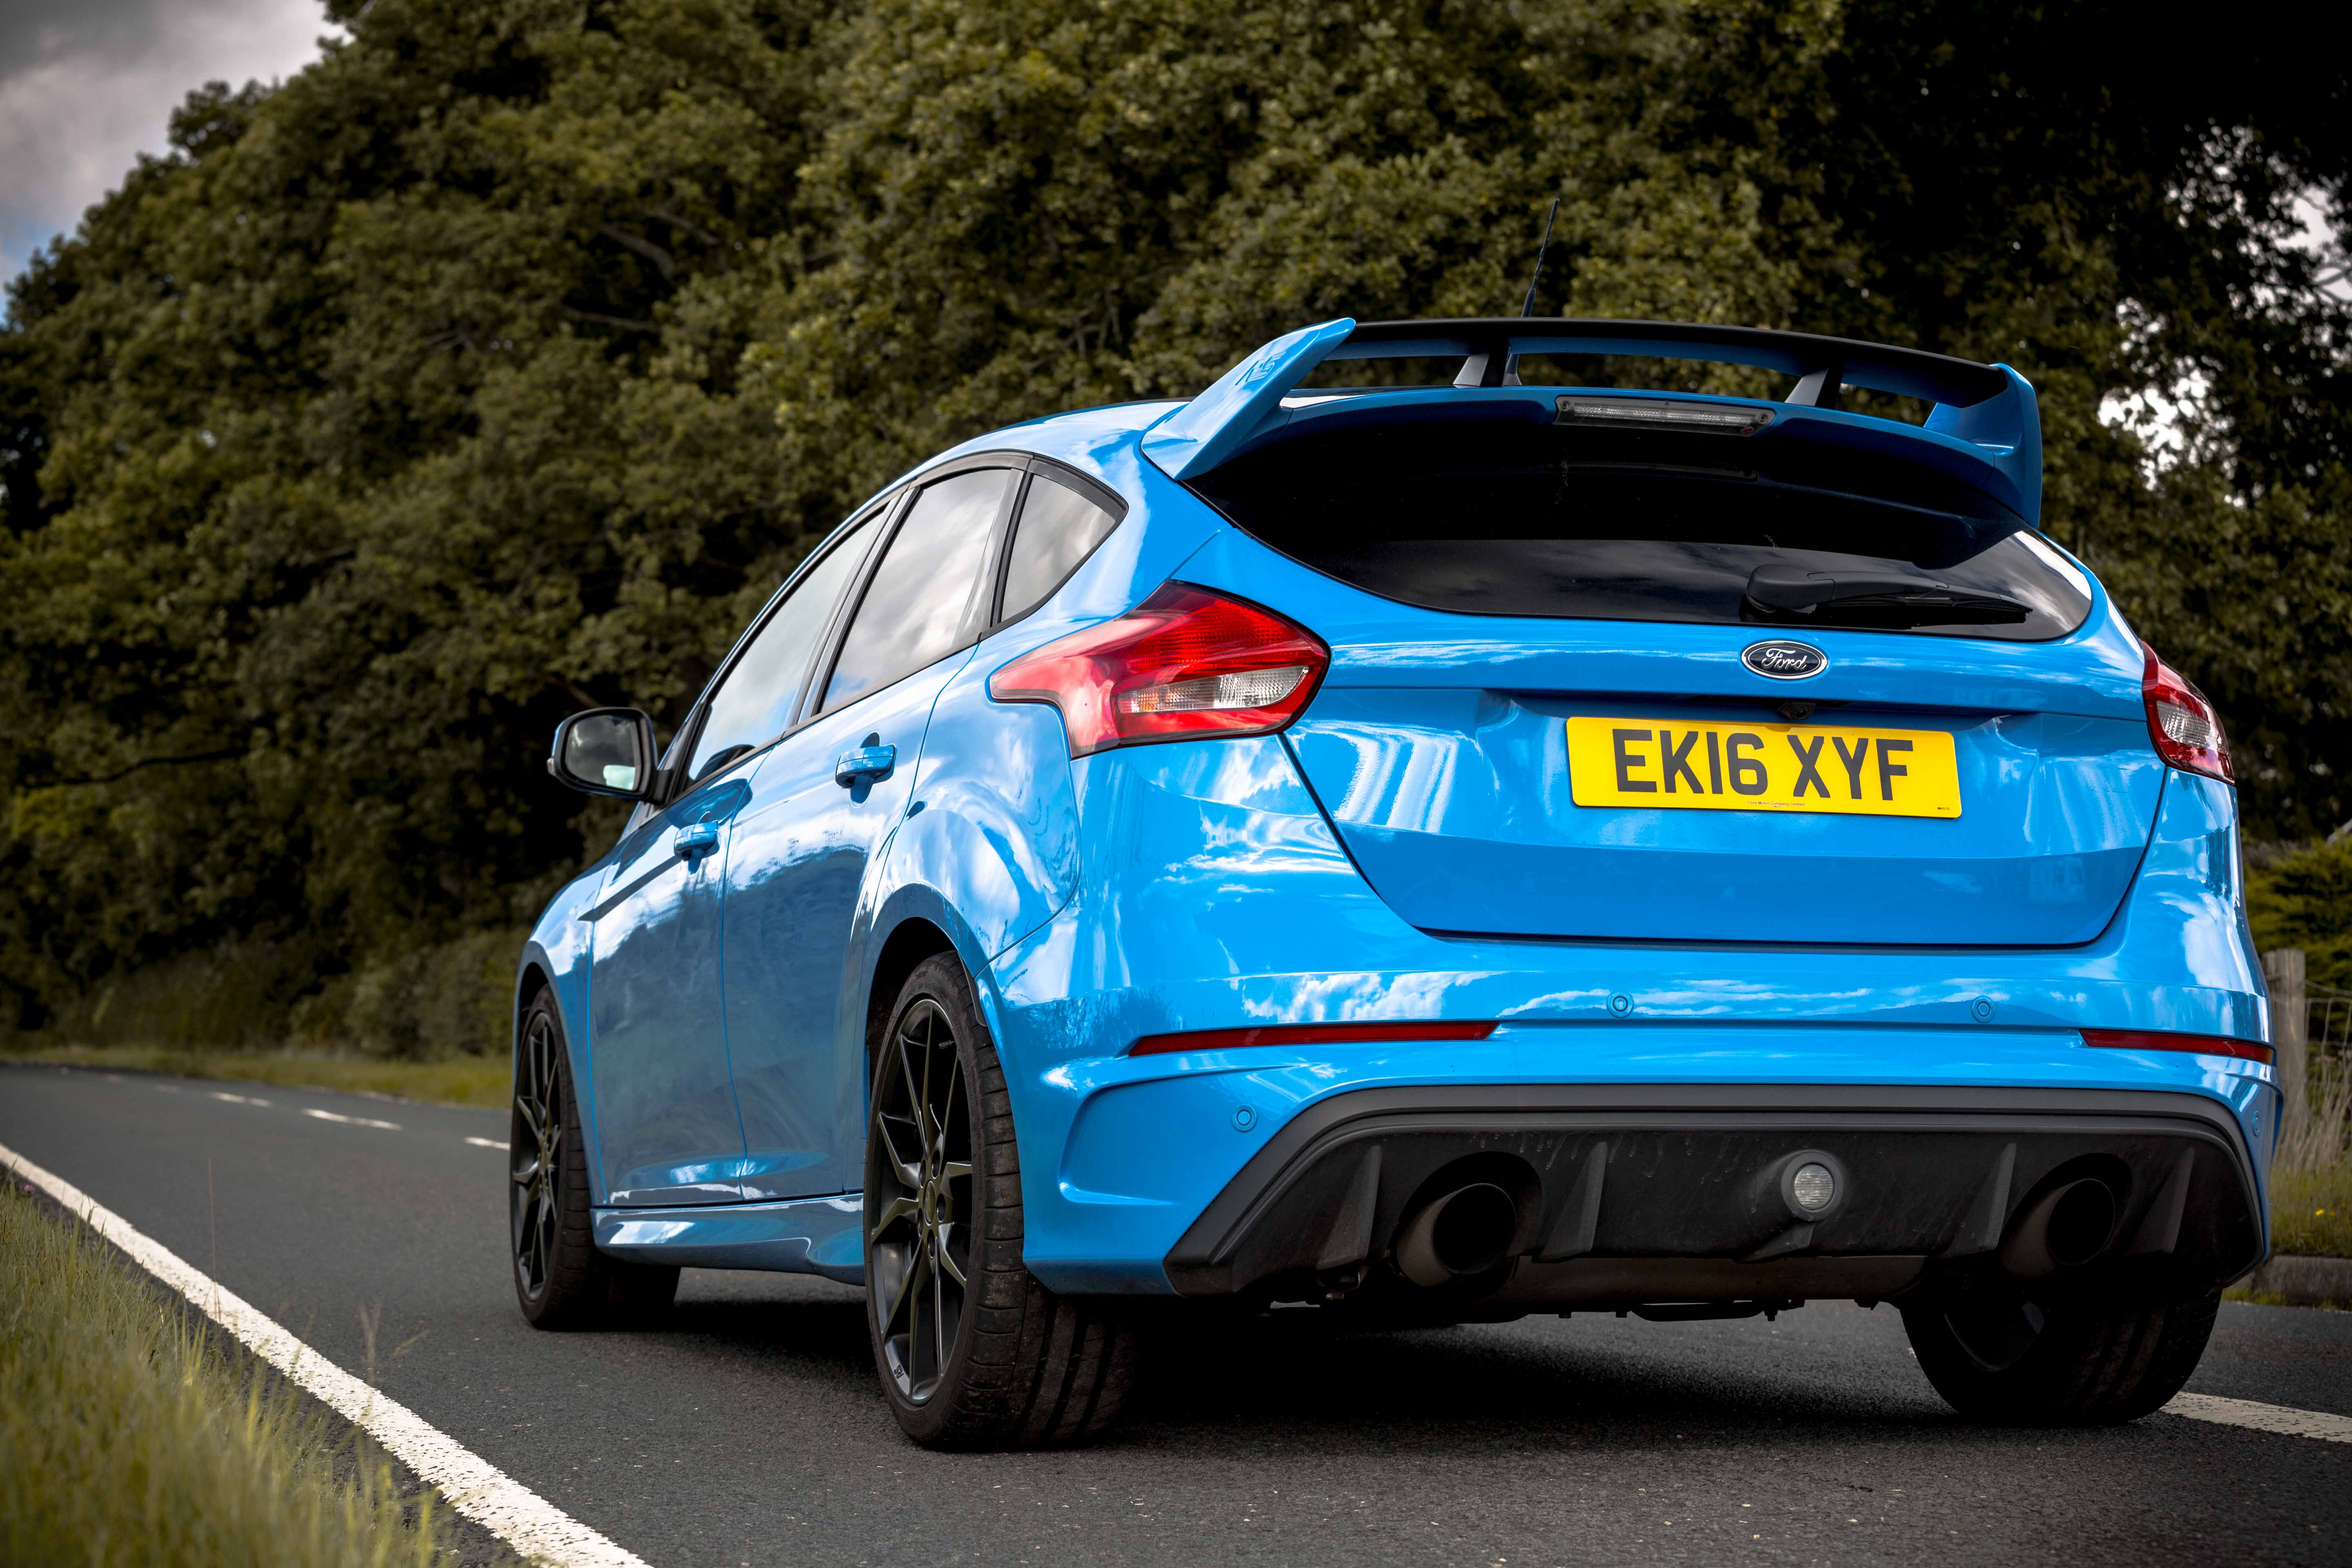 Ford Focus Review | Auto Express